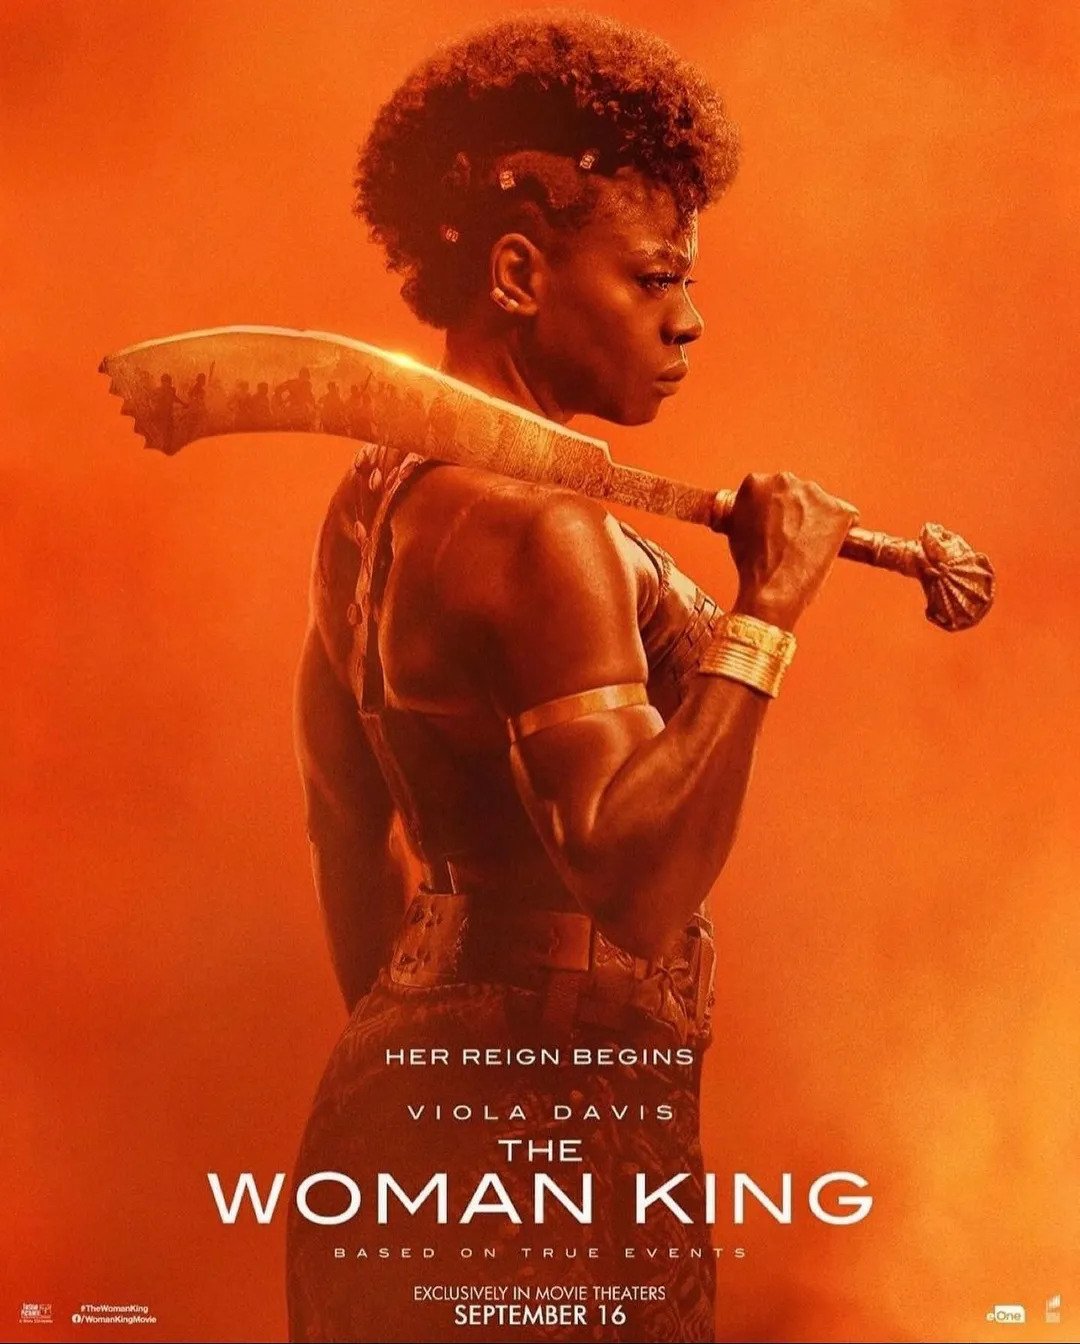 ‘The Woman King’ movie poster with a side view of Viola Davis holding a jungle bolo-like weapon